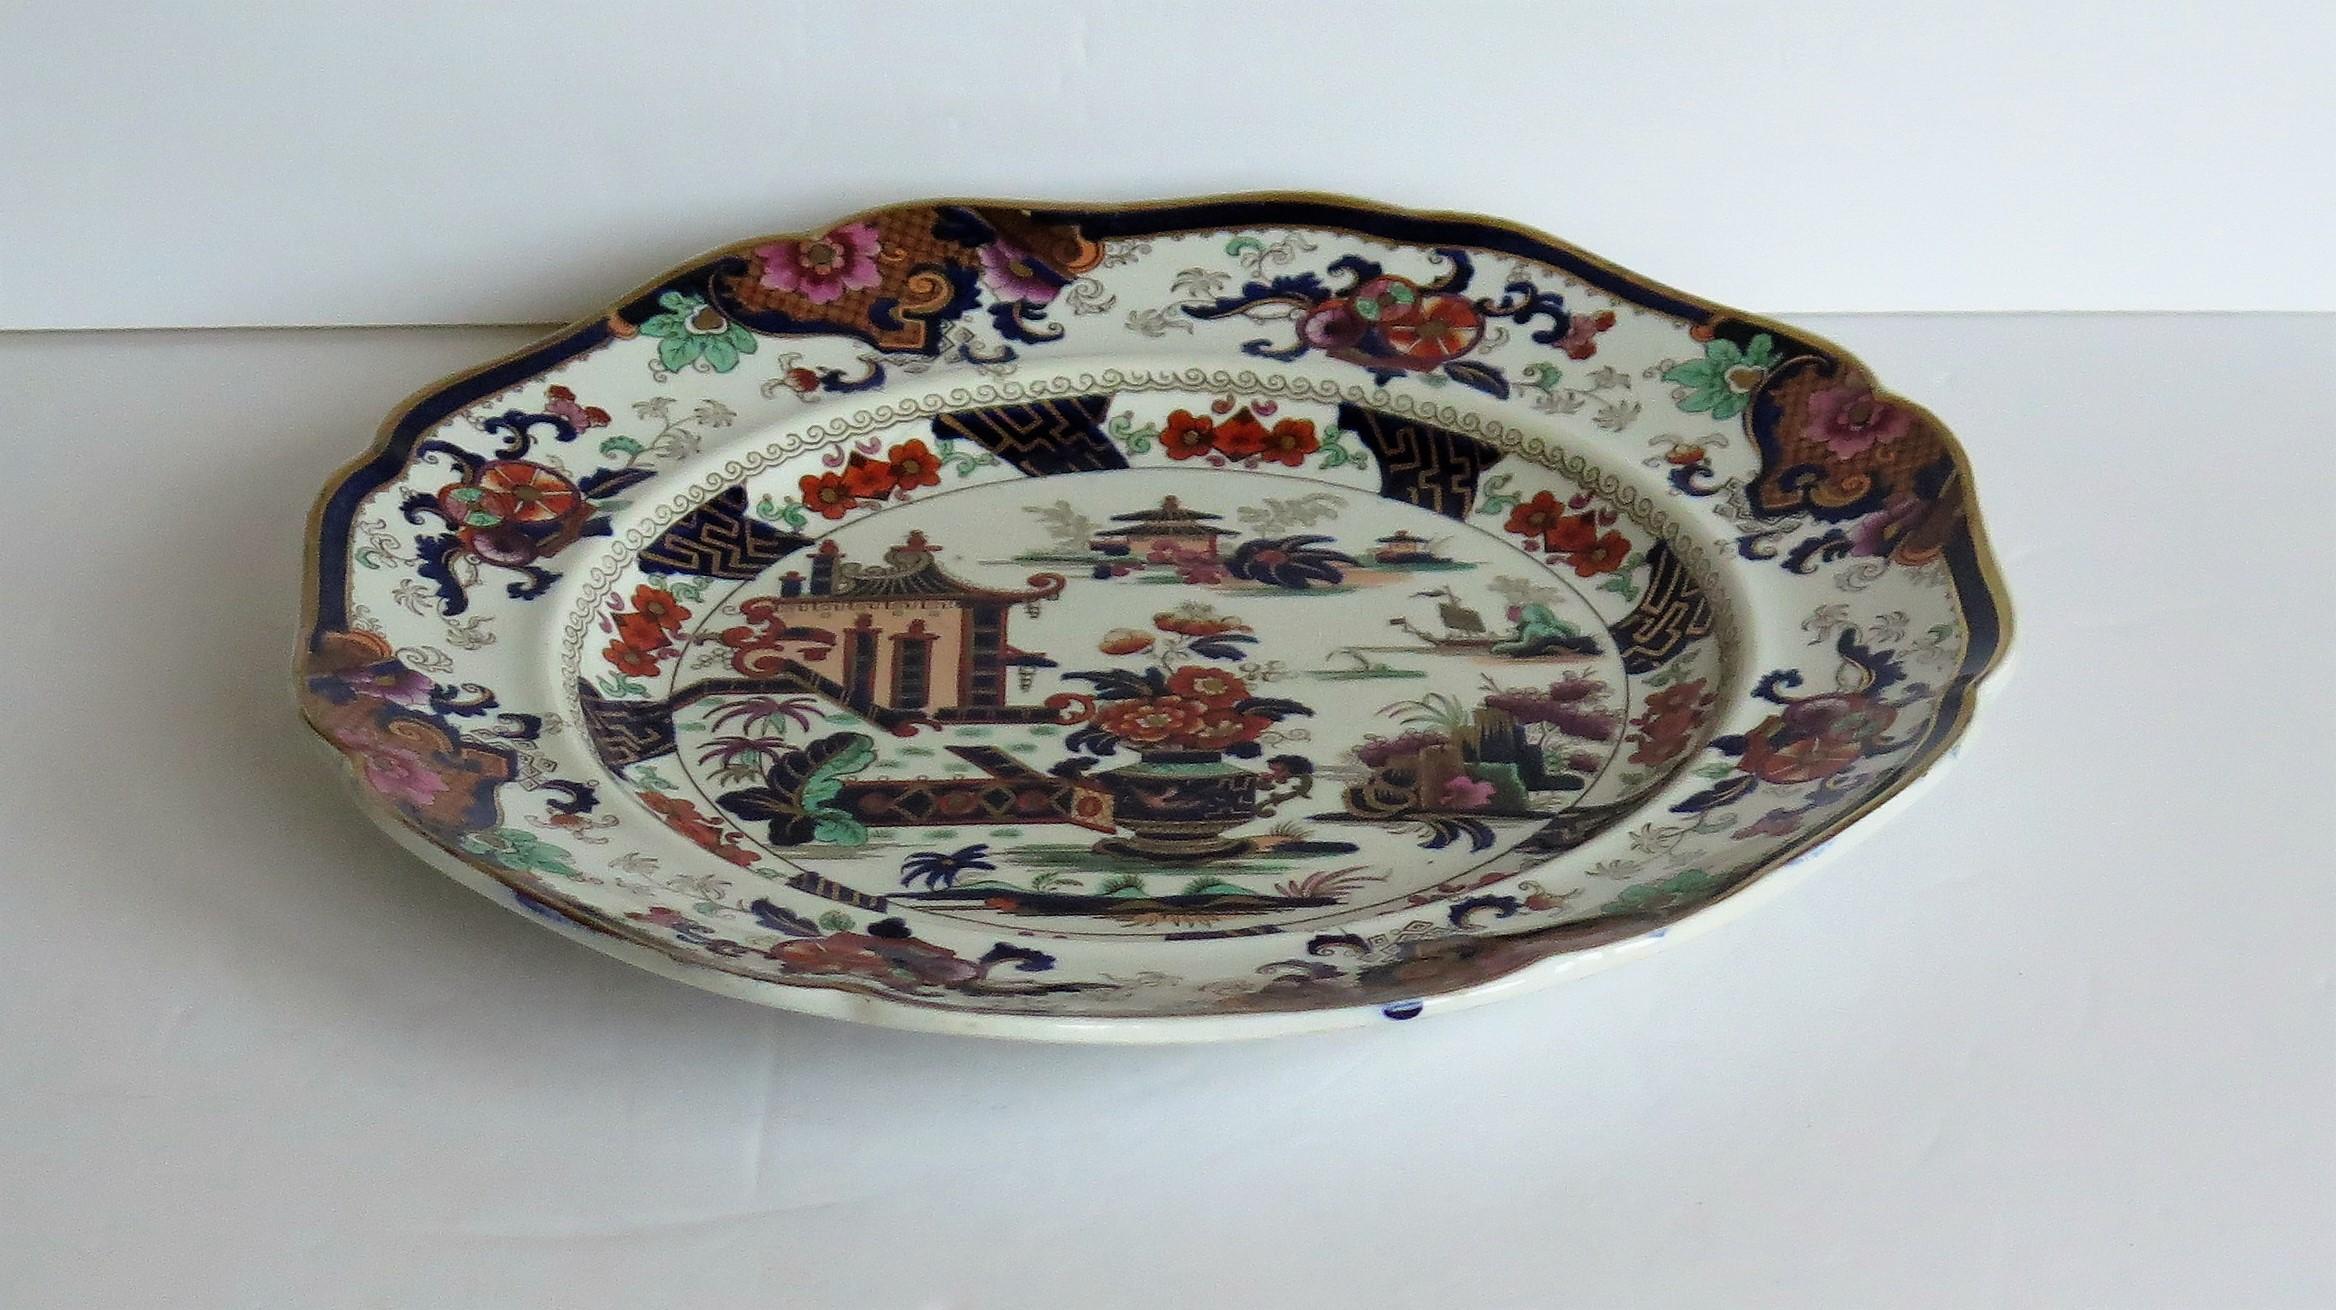 This is a highly decorative, Superior Stone China (ironstone), large plate by John Ridgway, dating to the William IV period of the 19th century, circa 1835.

This plate has been carefully hand painted, over a printed outline, in bold colorful